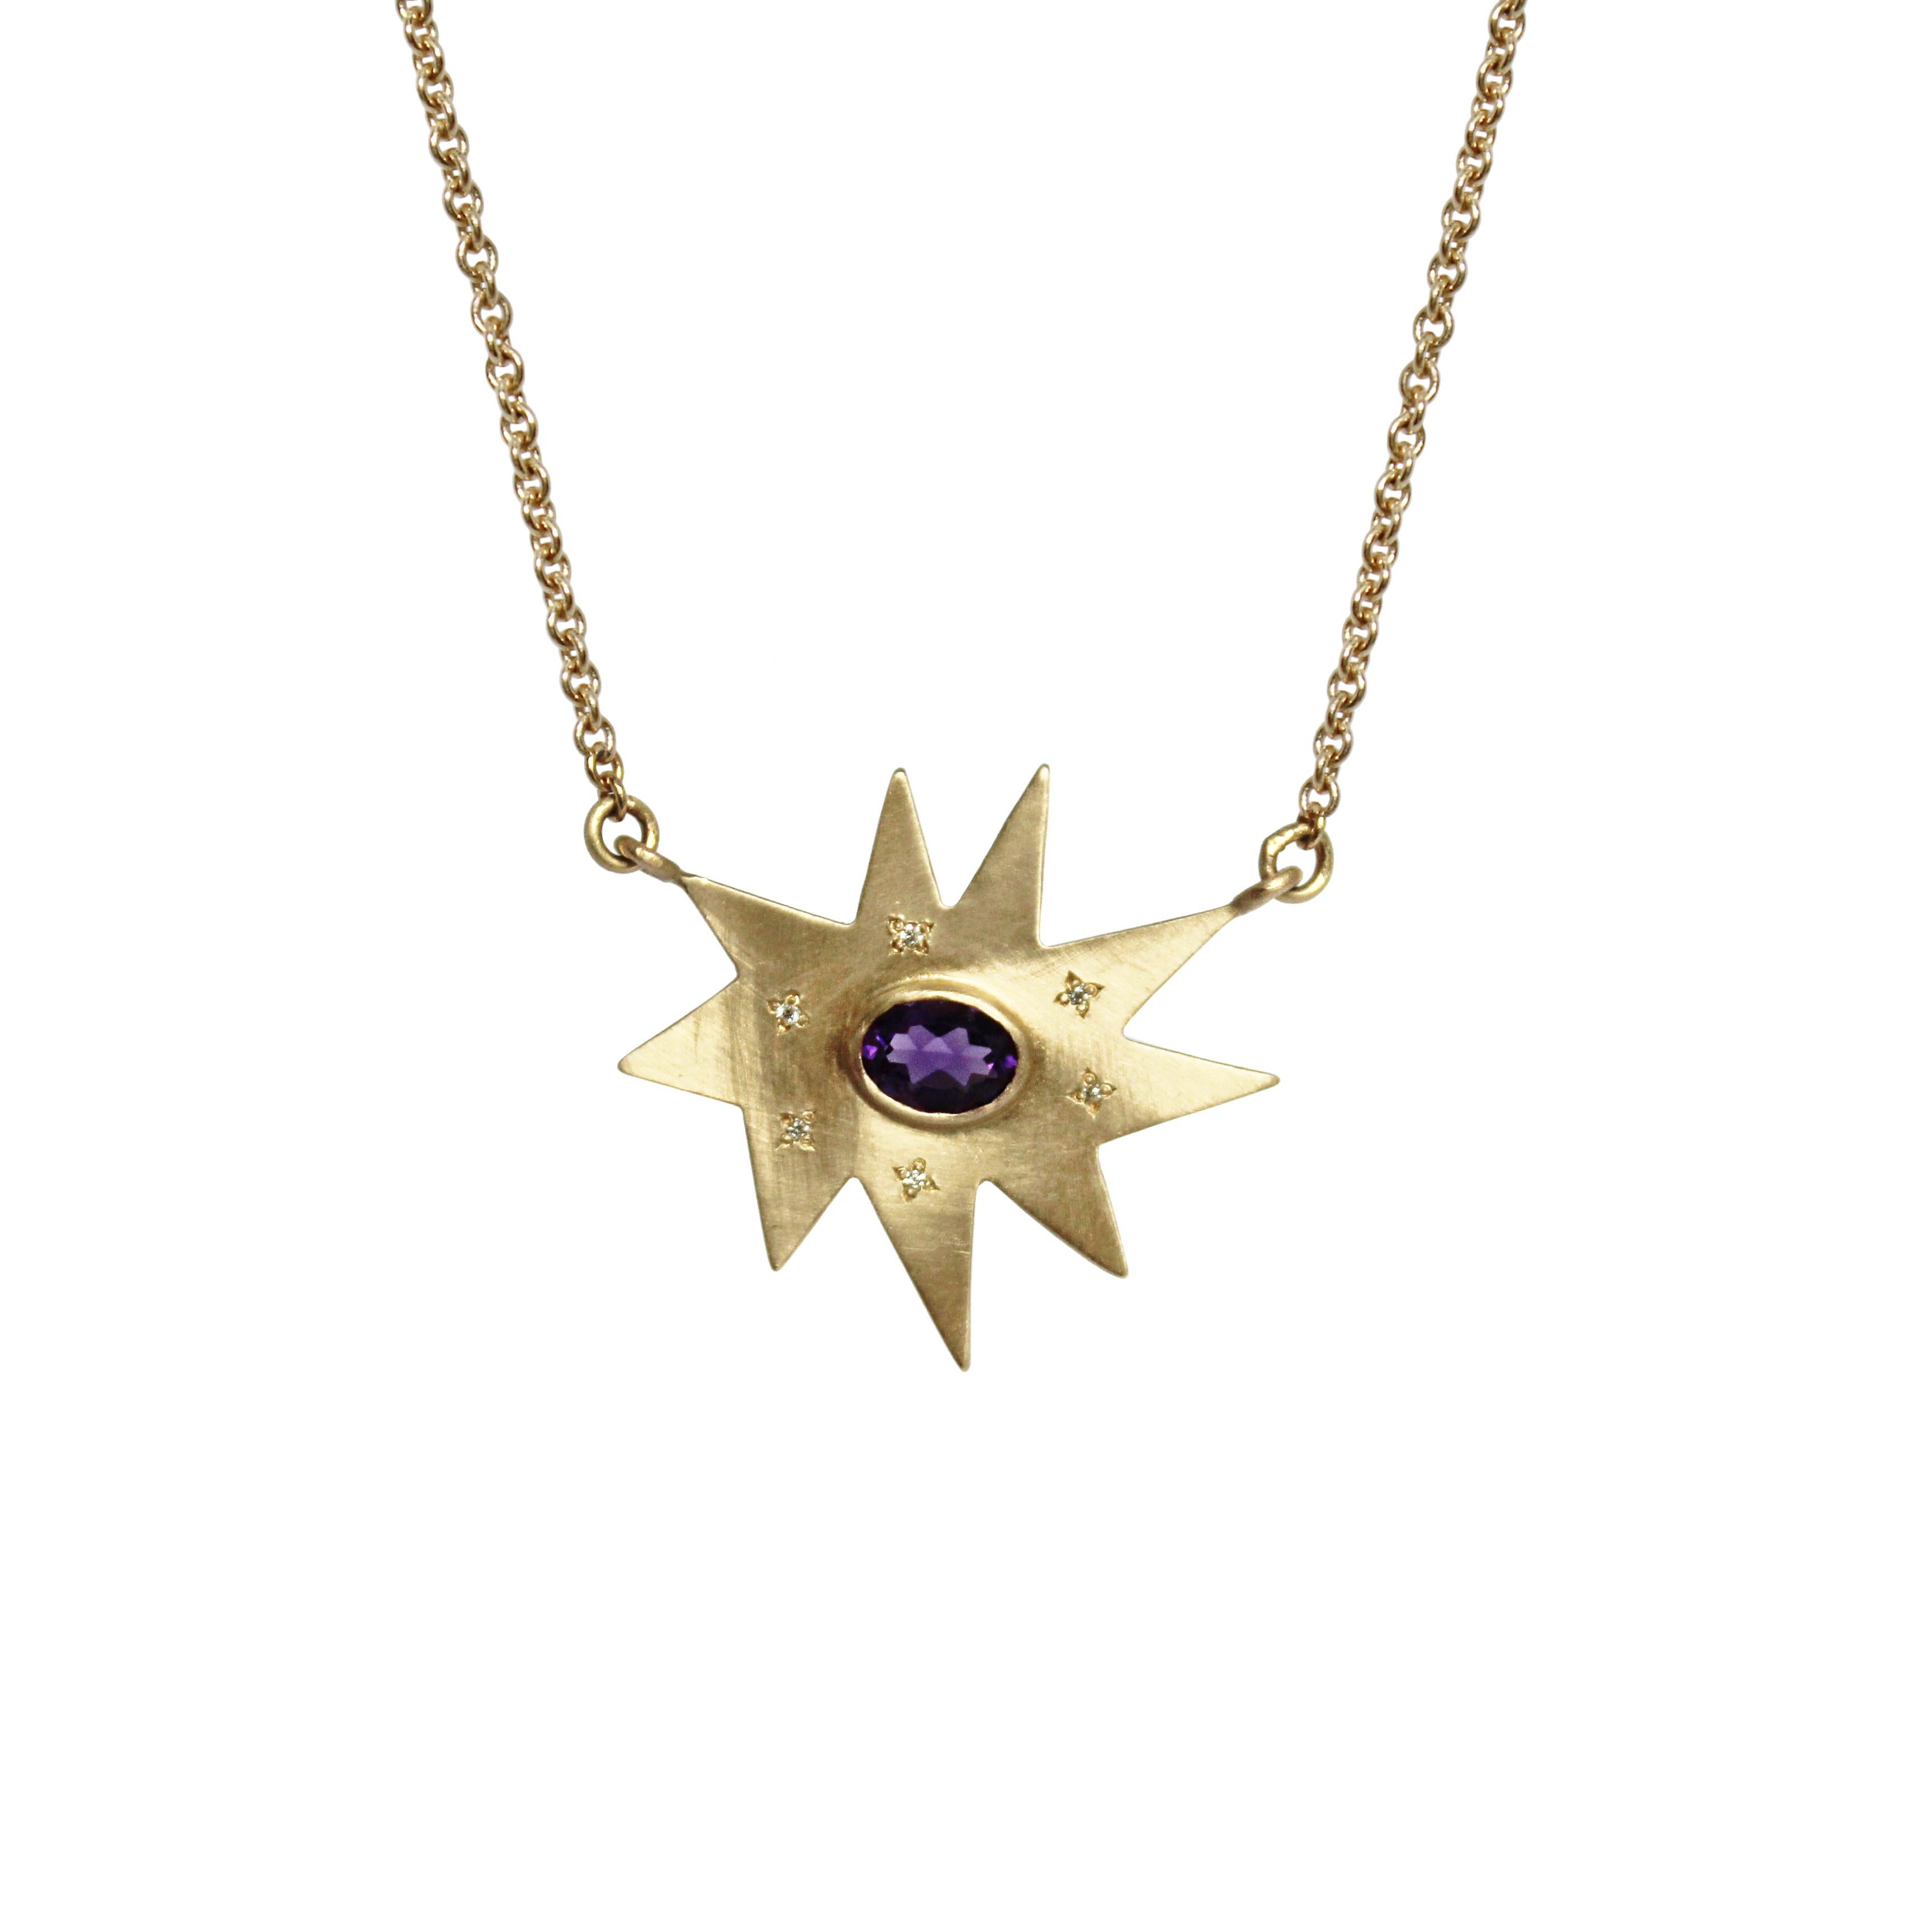 Classic and stunning. Our iconic matte gold organic star Stellina pendant necklace features our signature diamond dusting and a contrasting stunning purple amethyst. Hanging on a delicate gold chain, this piece is made to accent any outfit, and